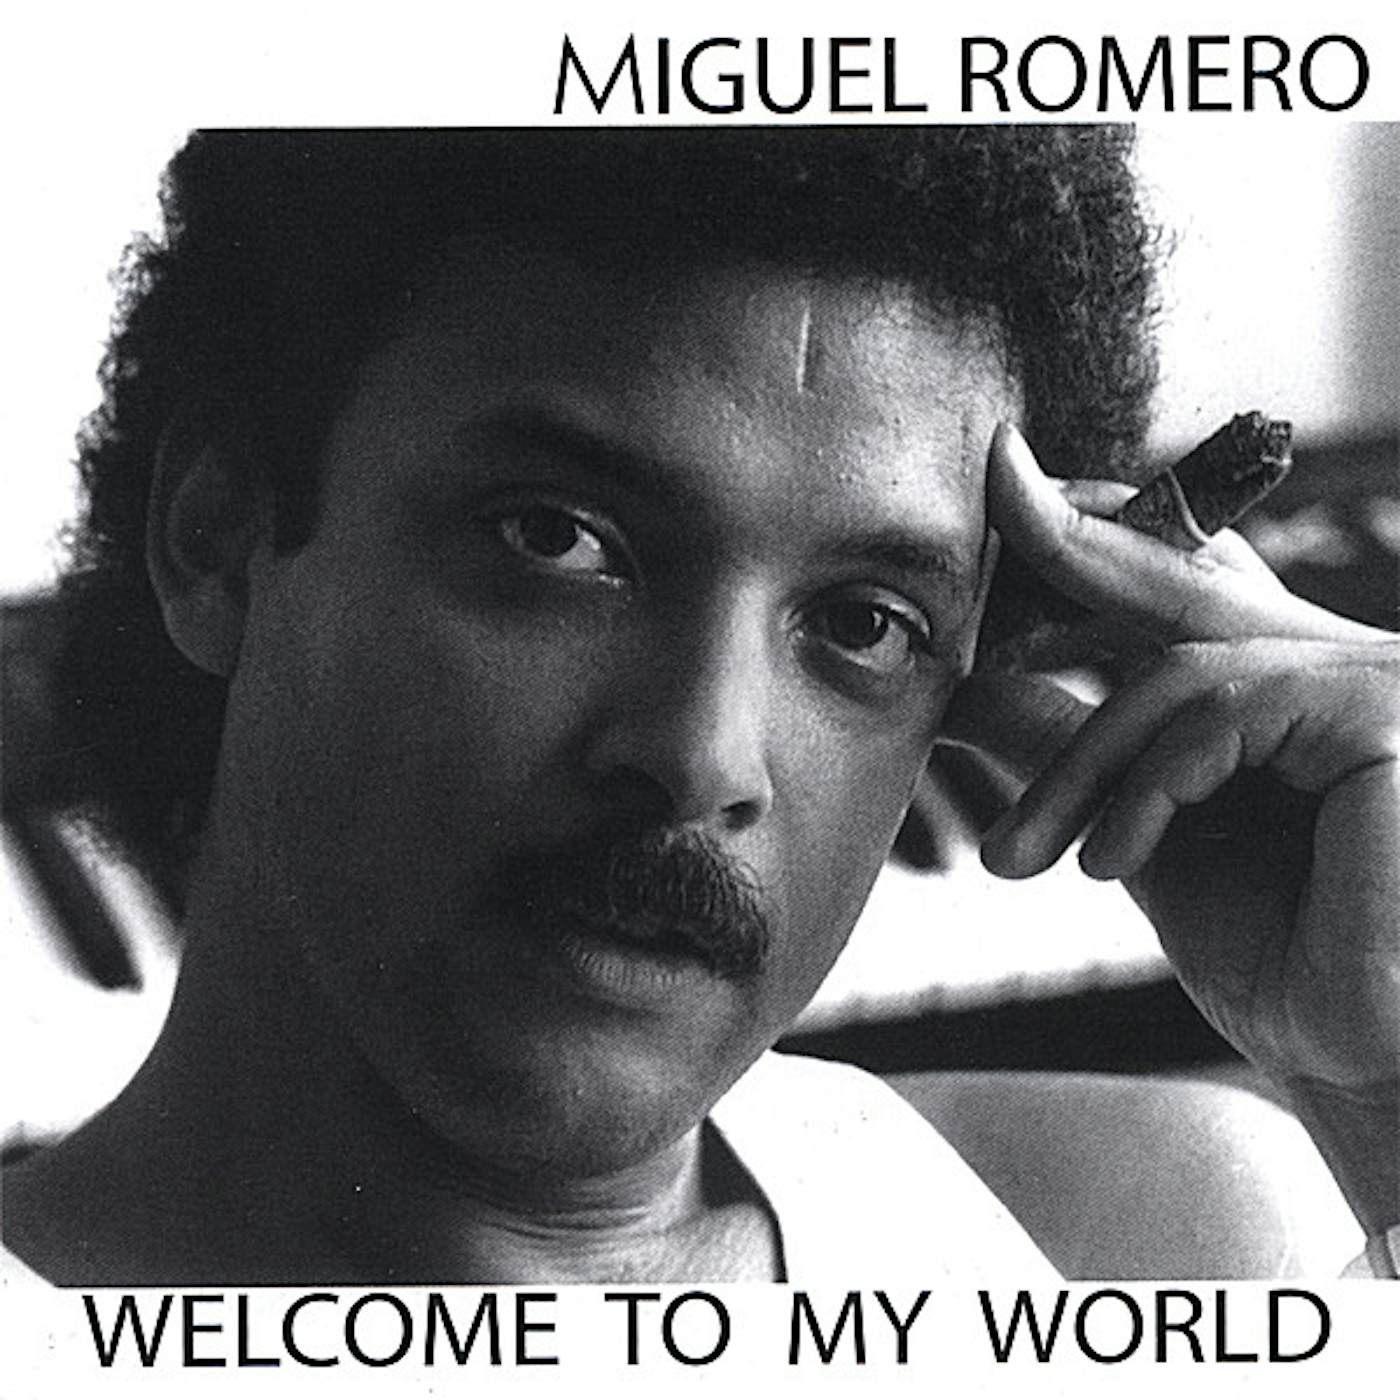 Miguel Romero WELCOME TO MY WORLD CD